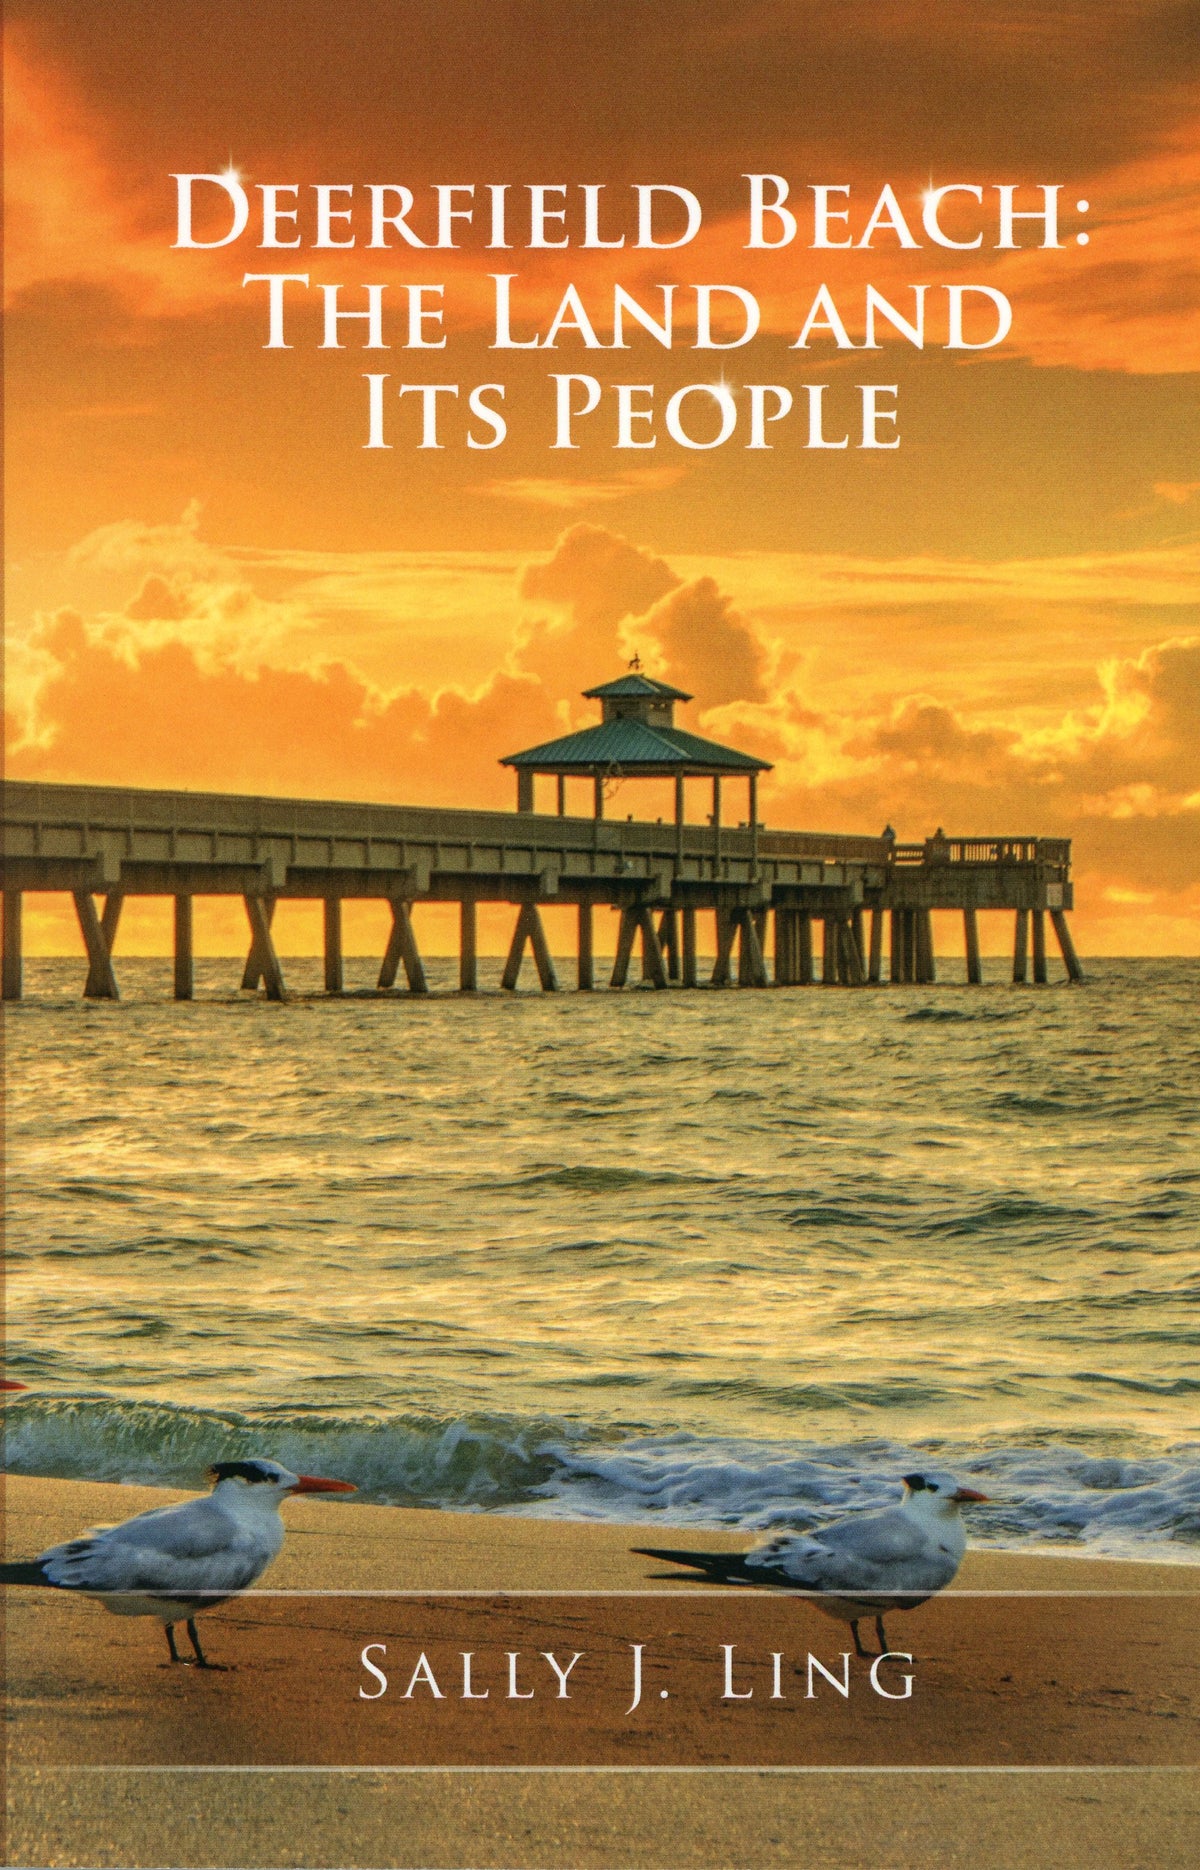 Deerfield Beach: The Land and Its People